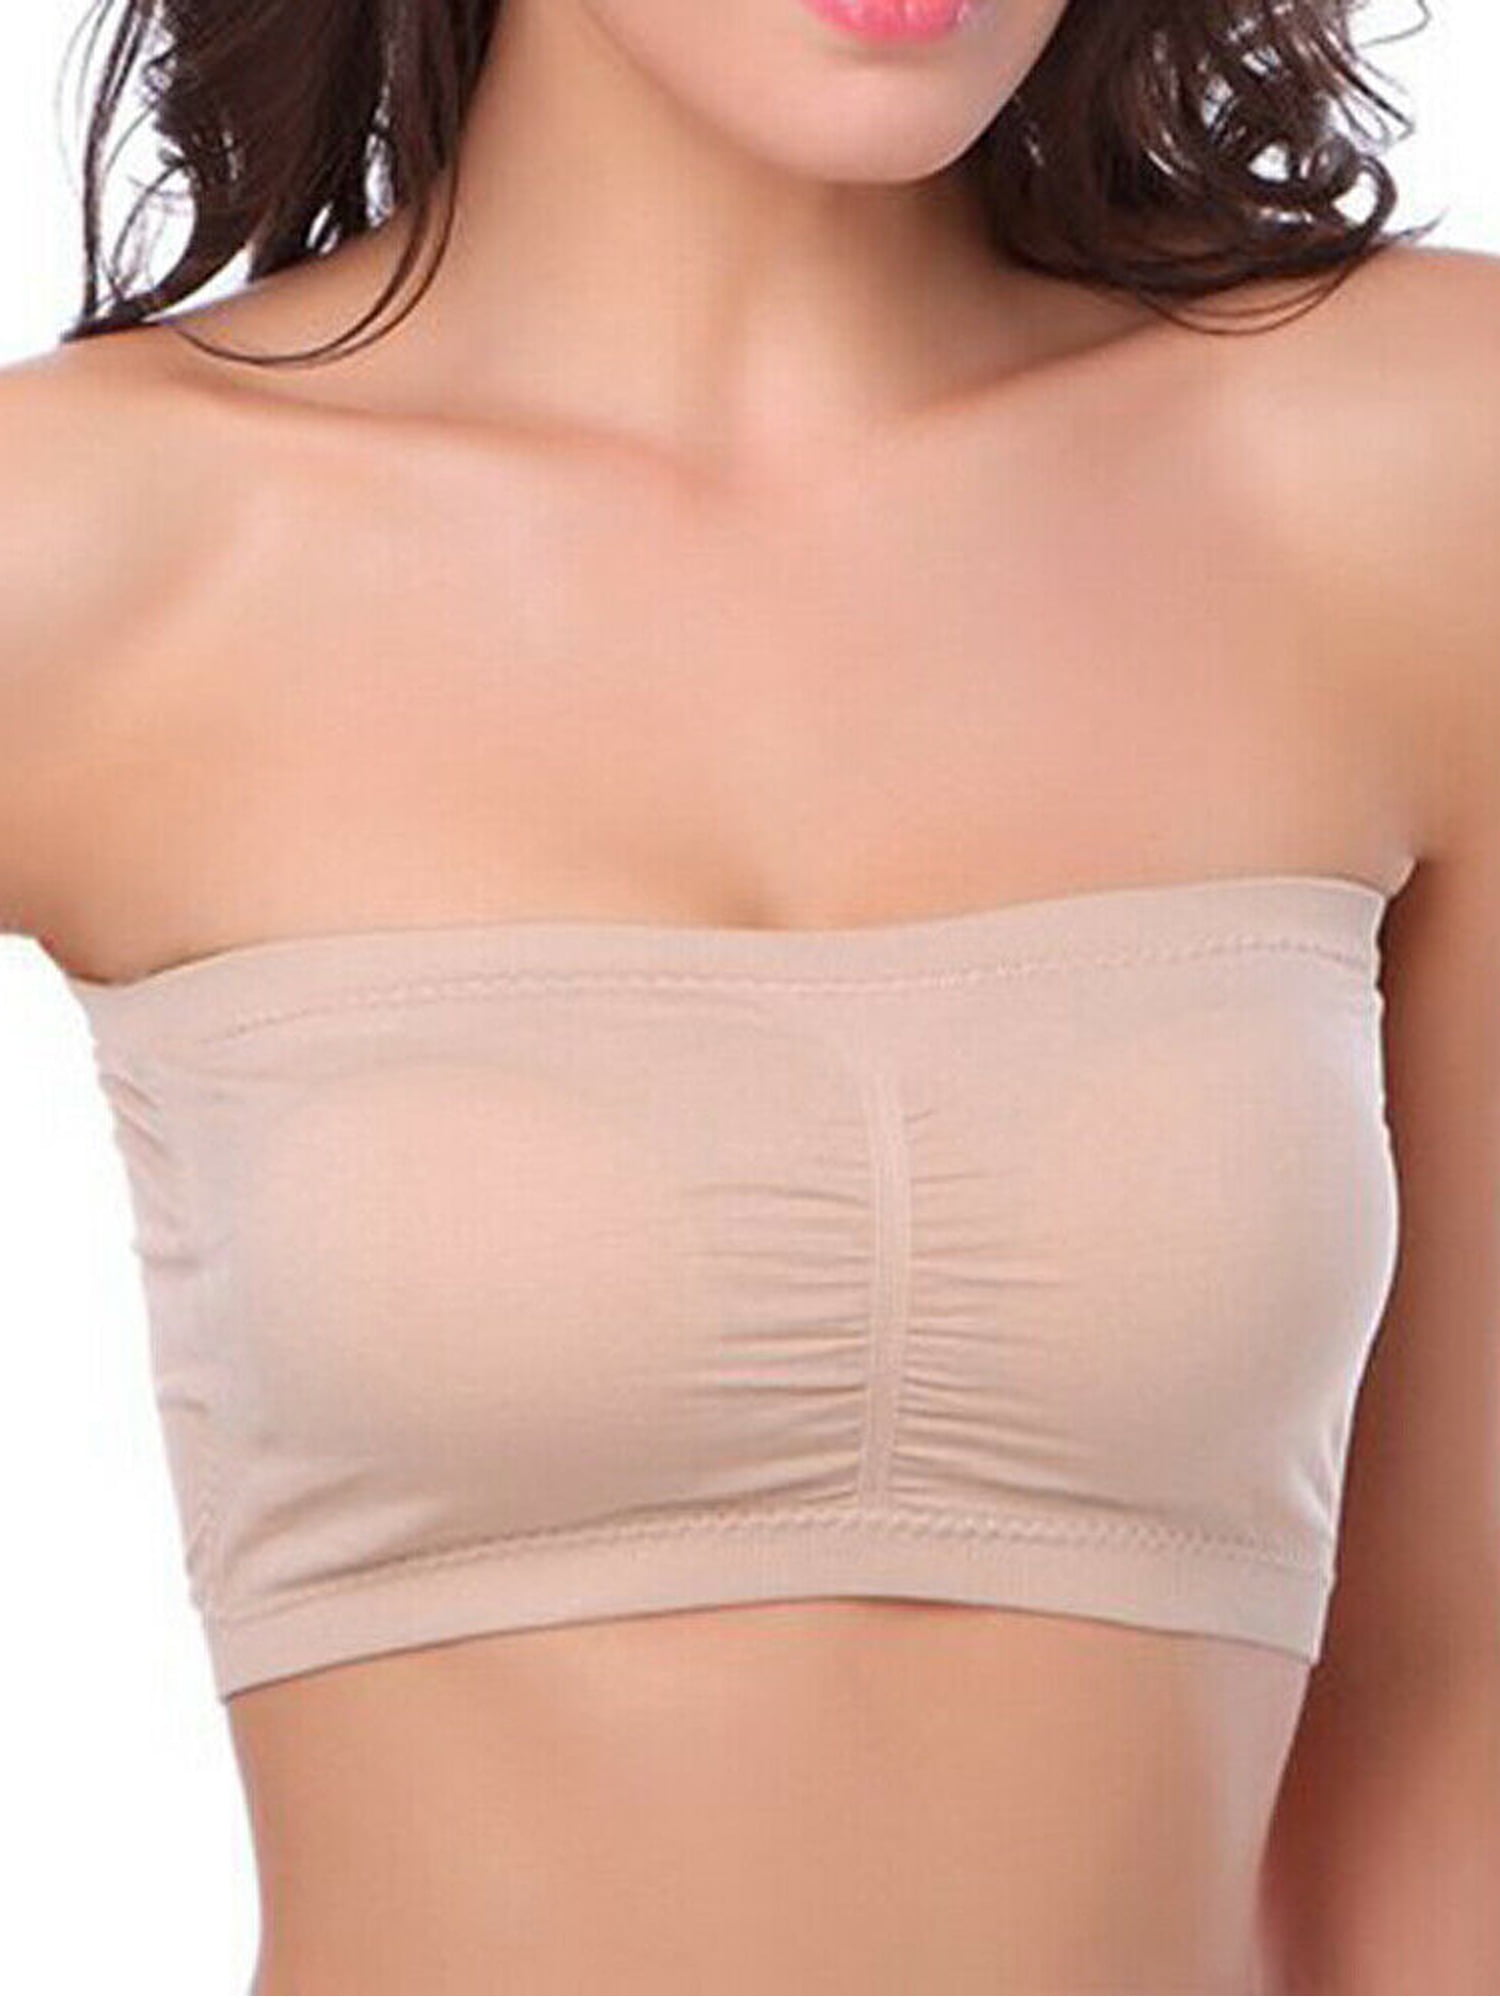 Women Tube Bra Strapless Double Layers Plus Size Removable Padded